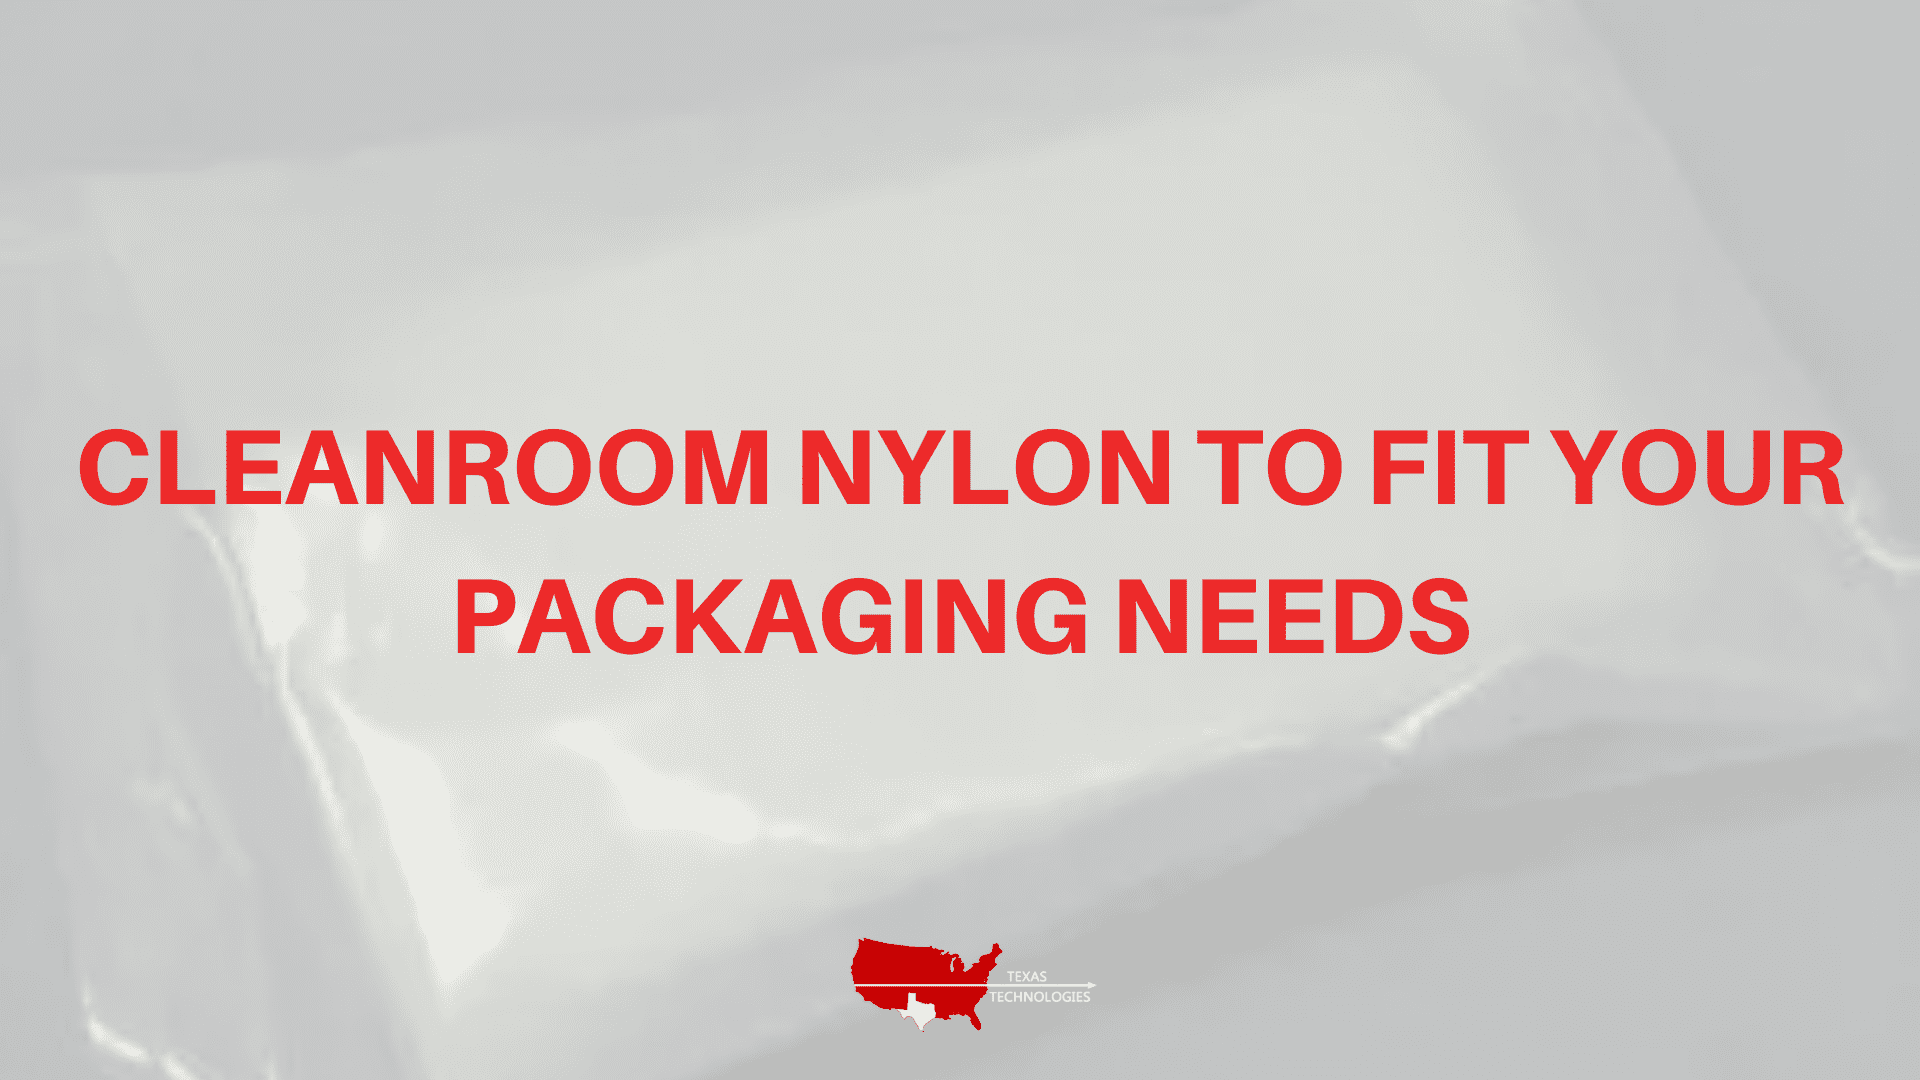 Cleanroom Nylon to Fit Your Packaging Needs